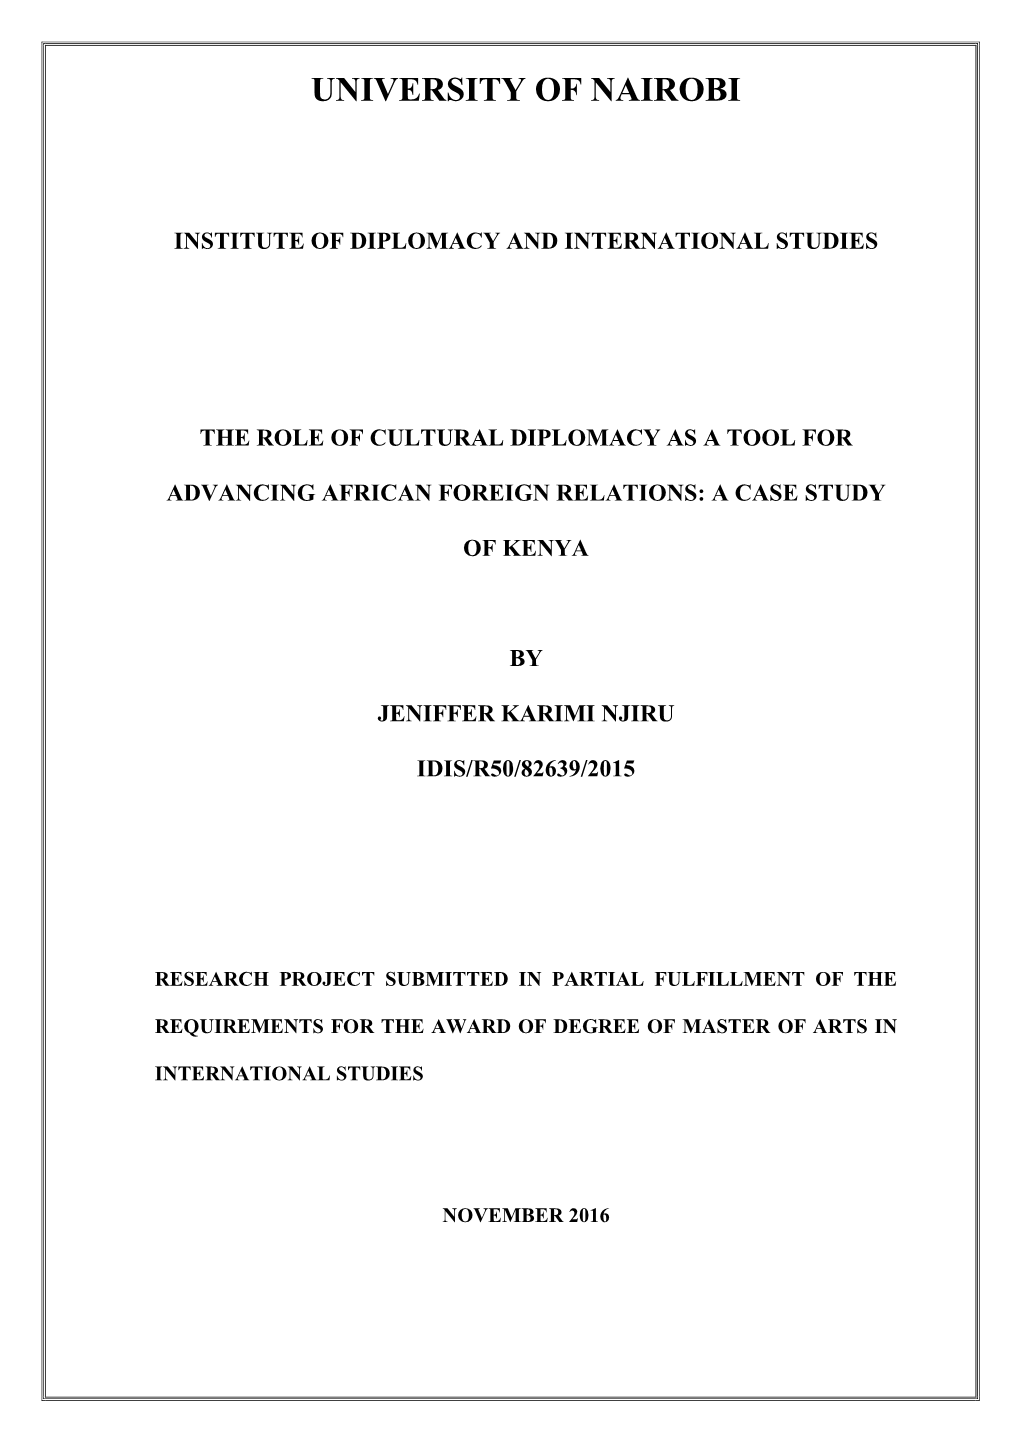 The Role of Cultural Diplomacy As a Tool for Advancing African Foreign Relations: a Case Study of Kenya